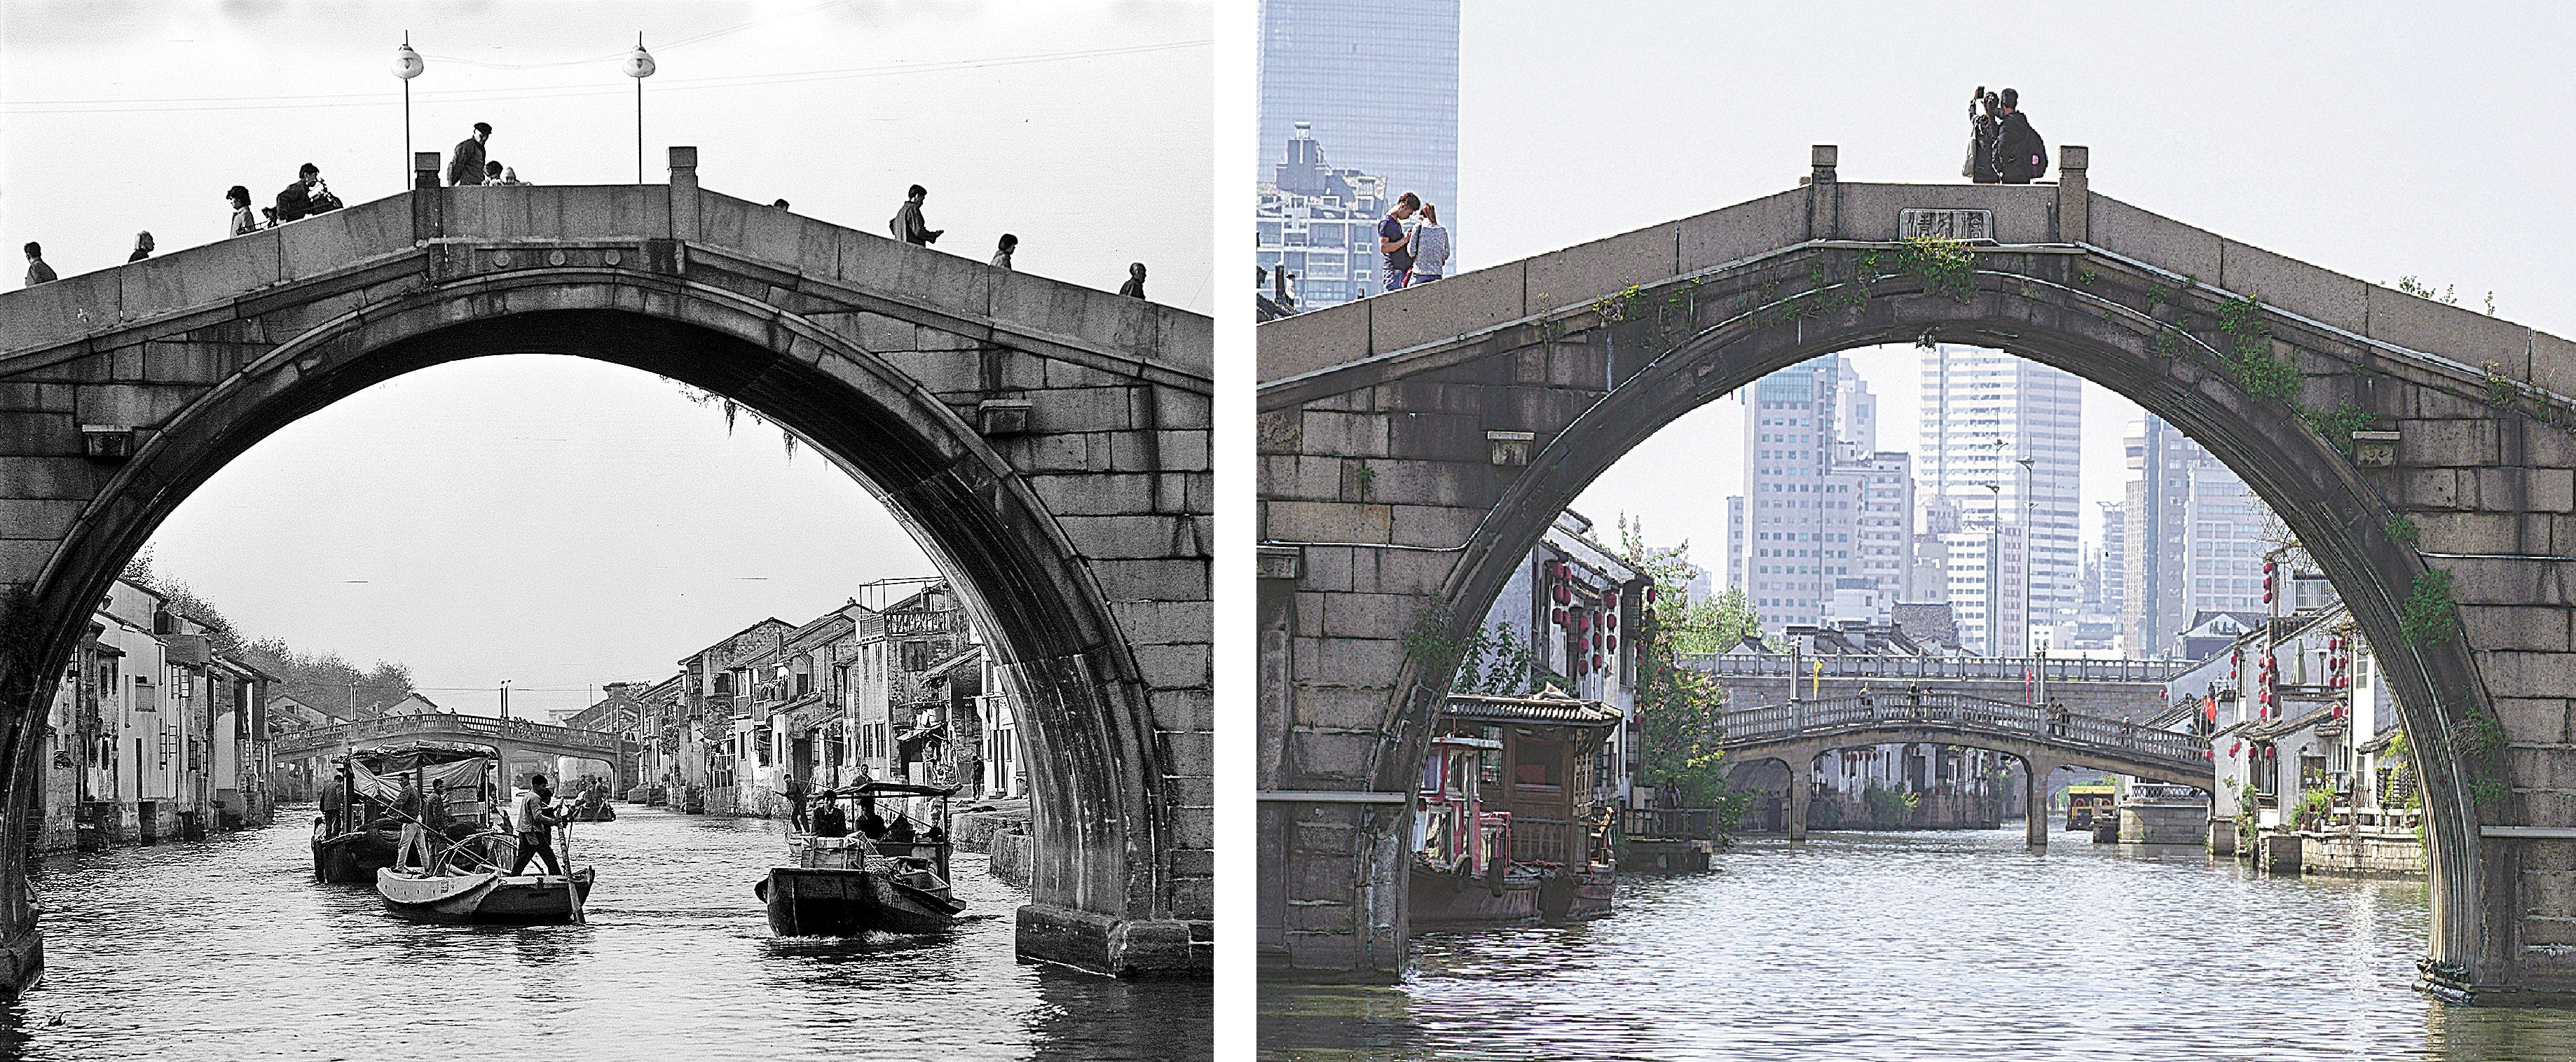 Two photos of Qingming Bridge in Wuxi, Jiangsu province, show the transformation of the canal. Liu Shizhao took the photos in 1982 and 2016 respectively